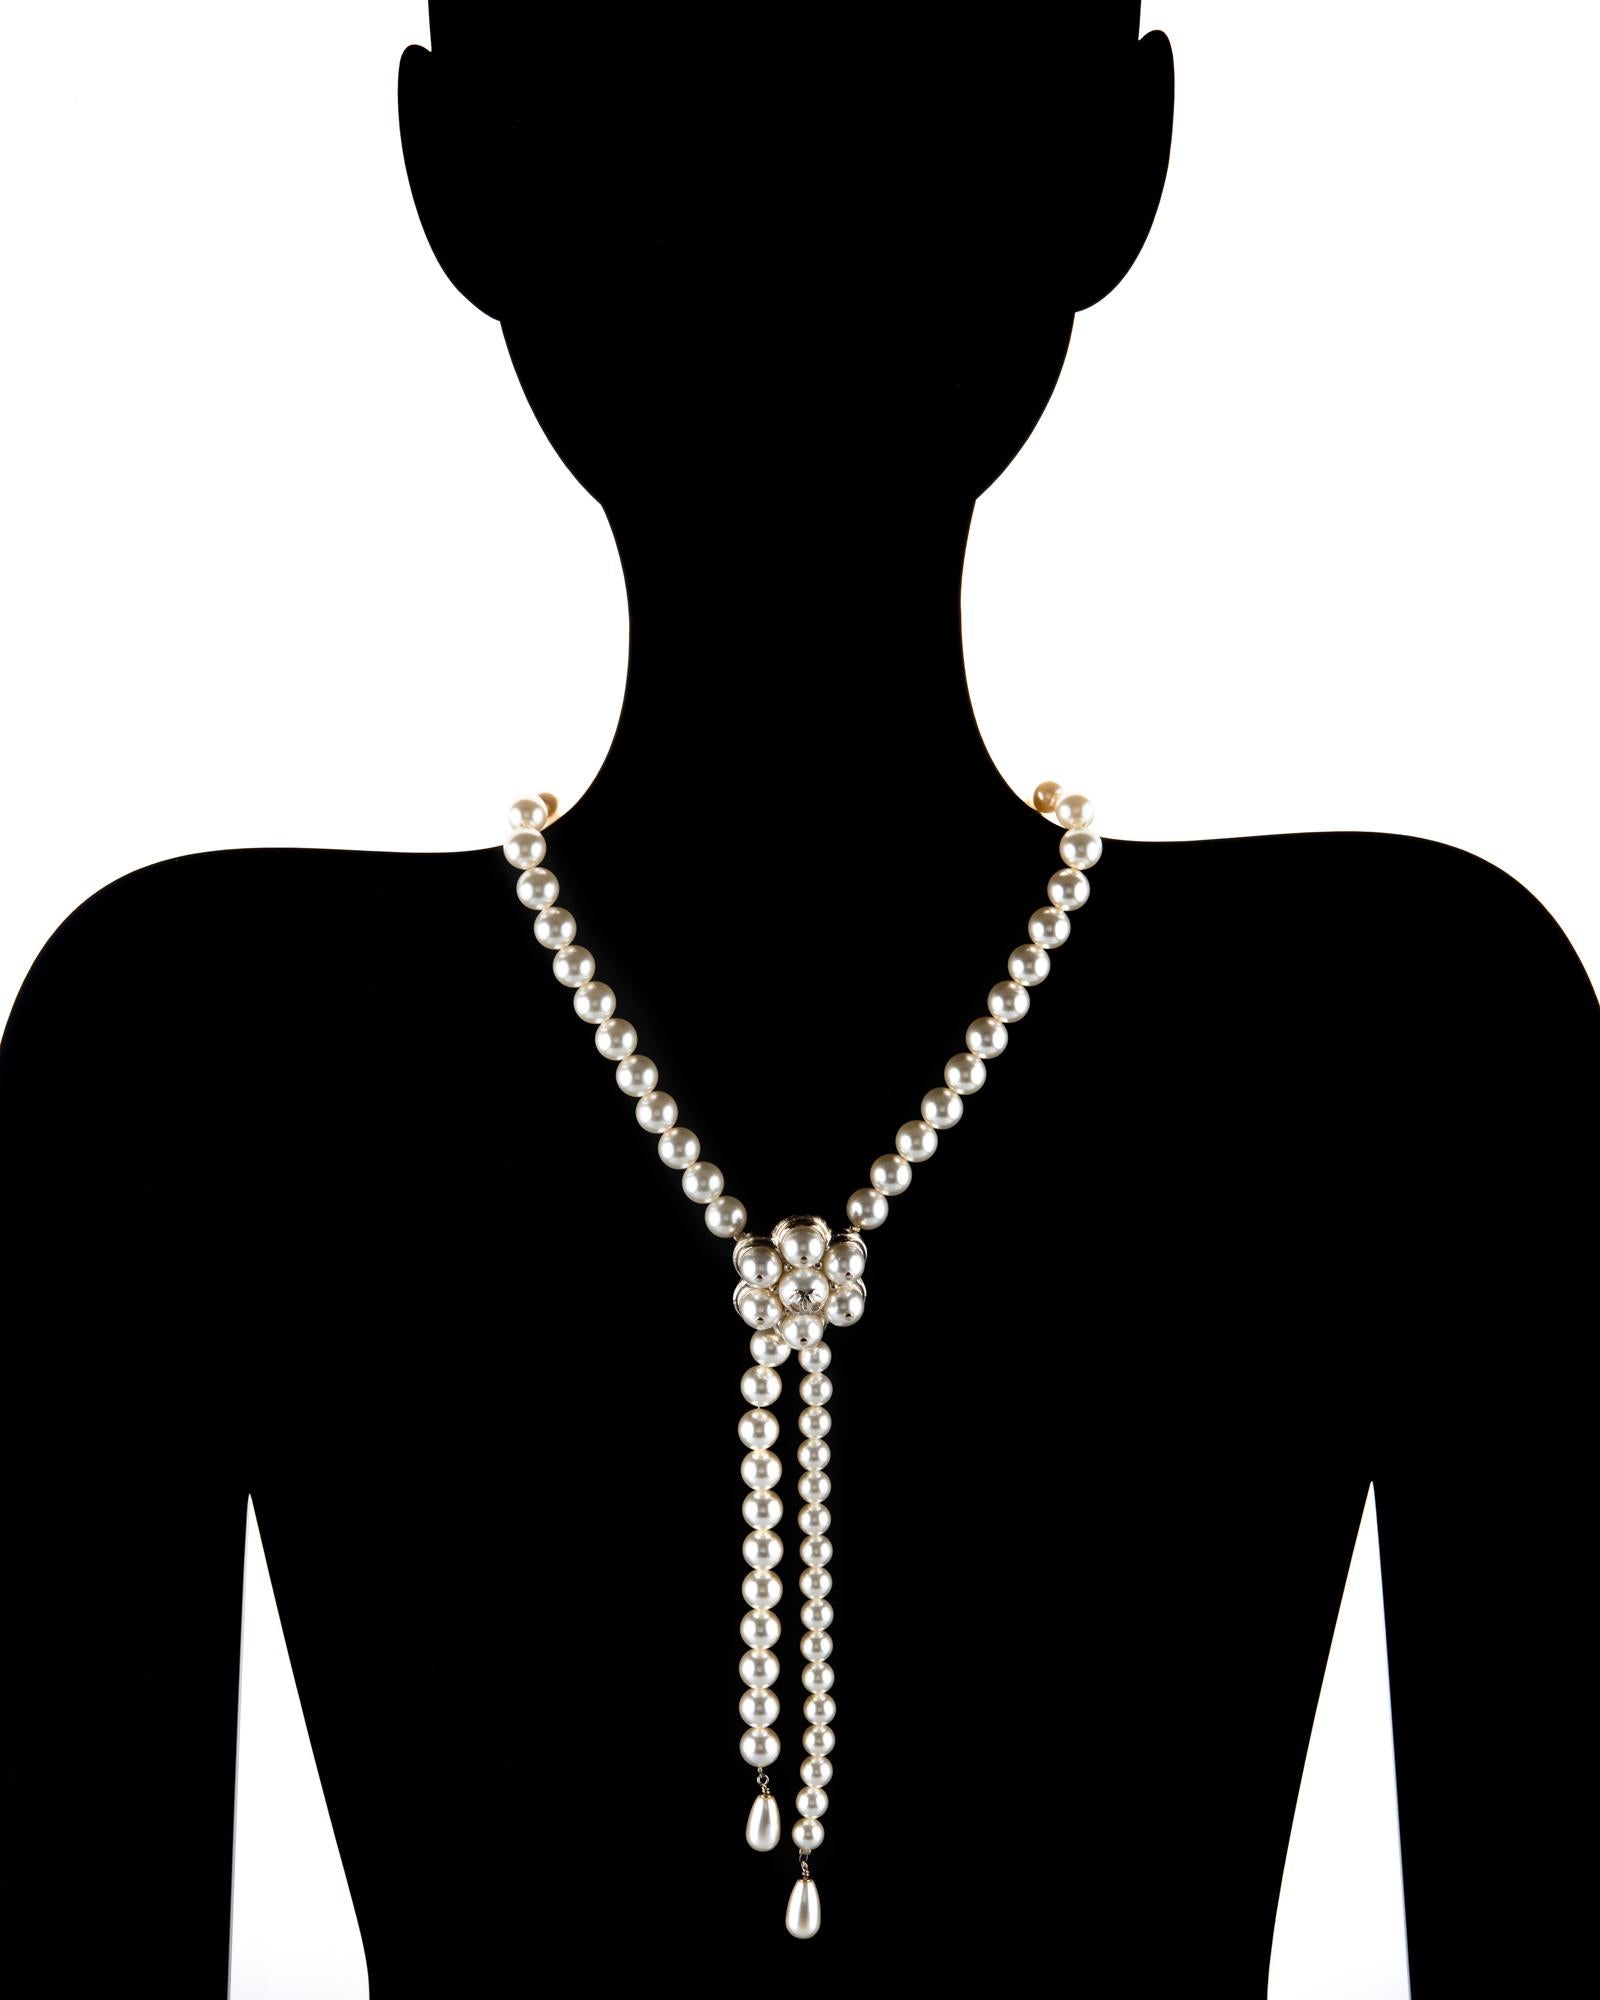 Stylish Chanel faux pearl choker drop necklace crafted in light yellow gold tone, circa 2015 

Faux pearls graduate in size from 8mm to 10mm. Two tear drop faux pearls measure 15mm x 9mm. 

The necklace dates to 2015. The necklace measures 15 inches